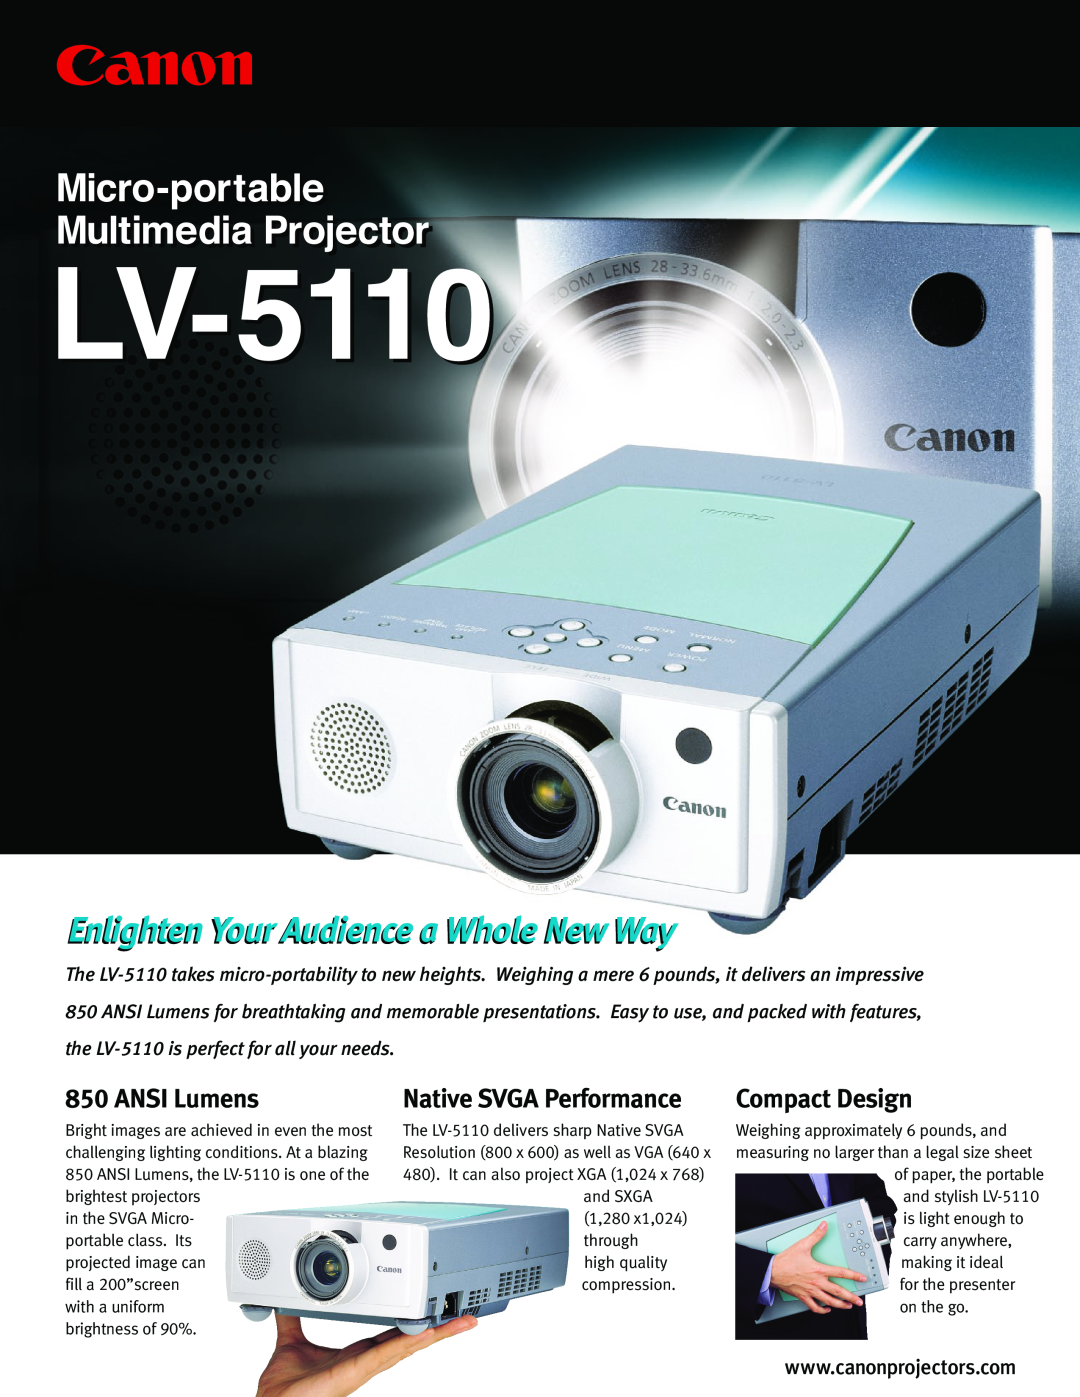 Cannon LV-5110 manual Enlighten Your Audience a Whole New Way, ANSI Lumens, Native SVGA Performance, Compact Design 